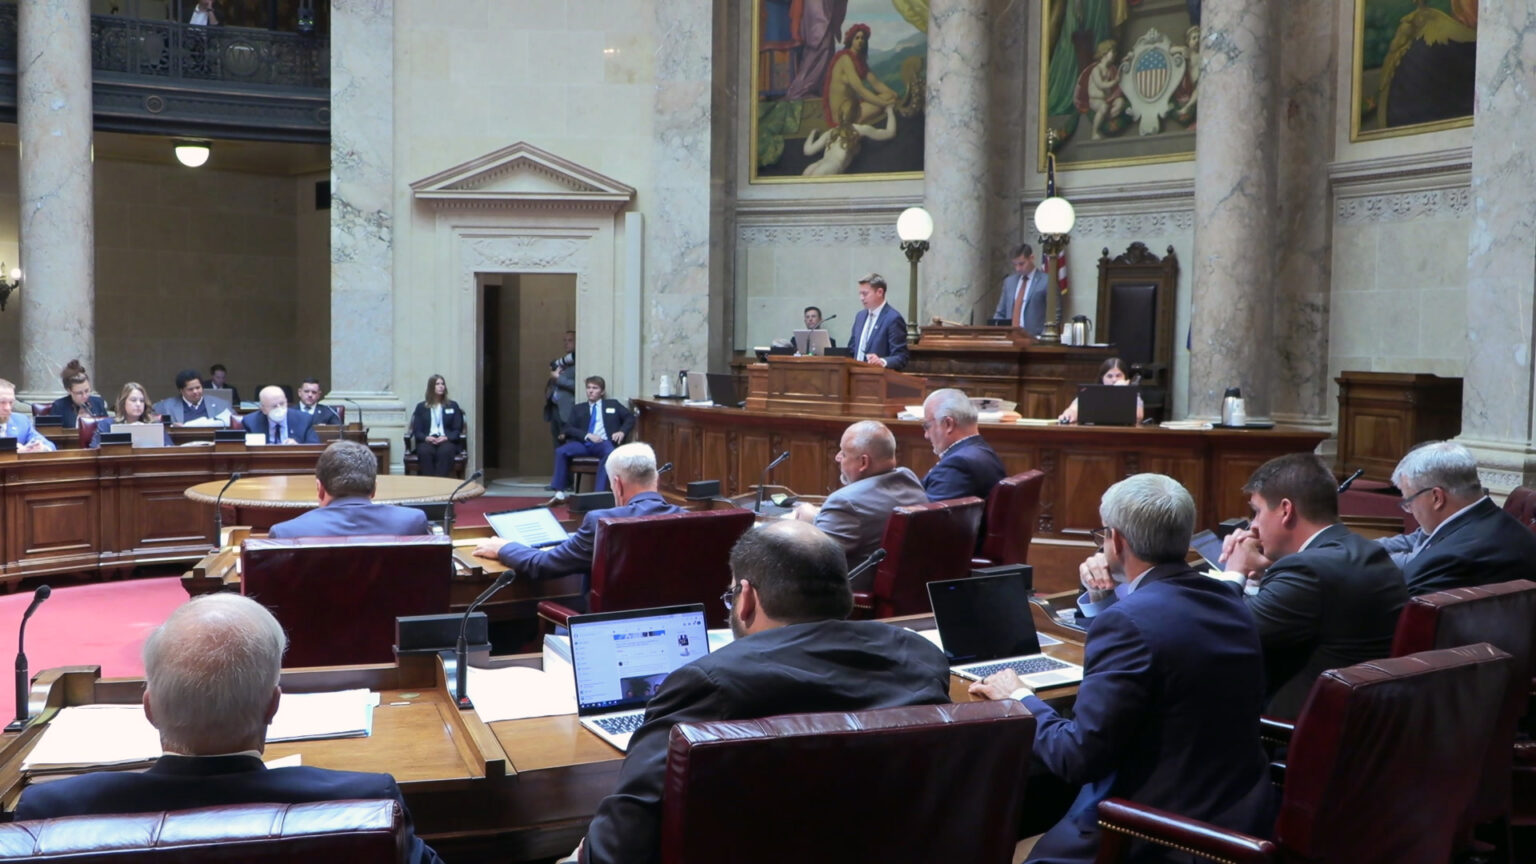 State senators sit at wood desks arranged in a semi-circle and listen to another senator direction the session from a wooden legislative dais, in a room with marble masonry and pillars, large paintings, and a second-story observation gallery.